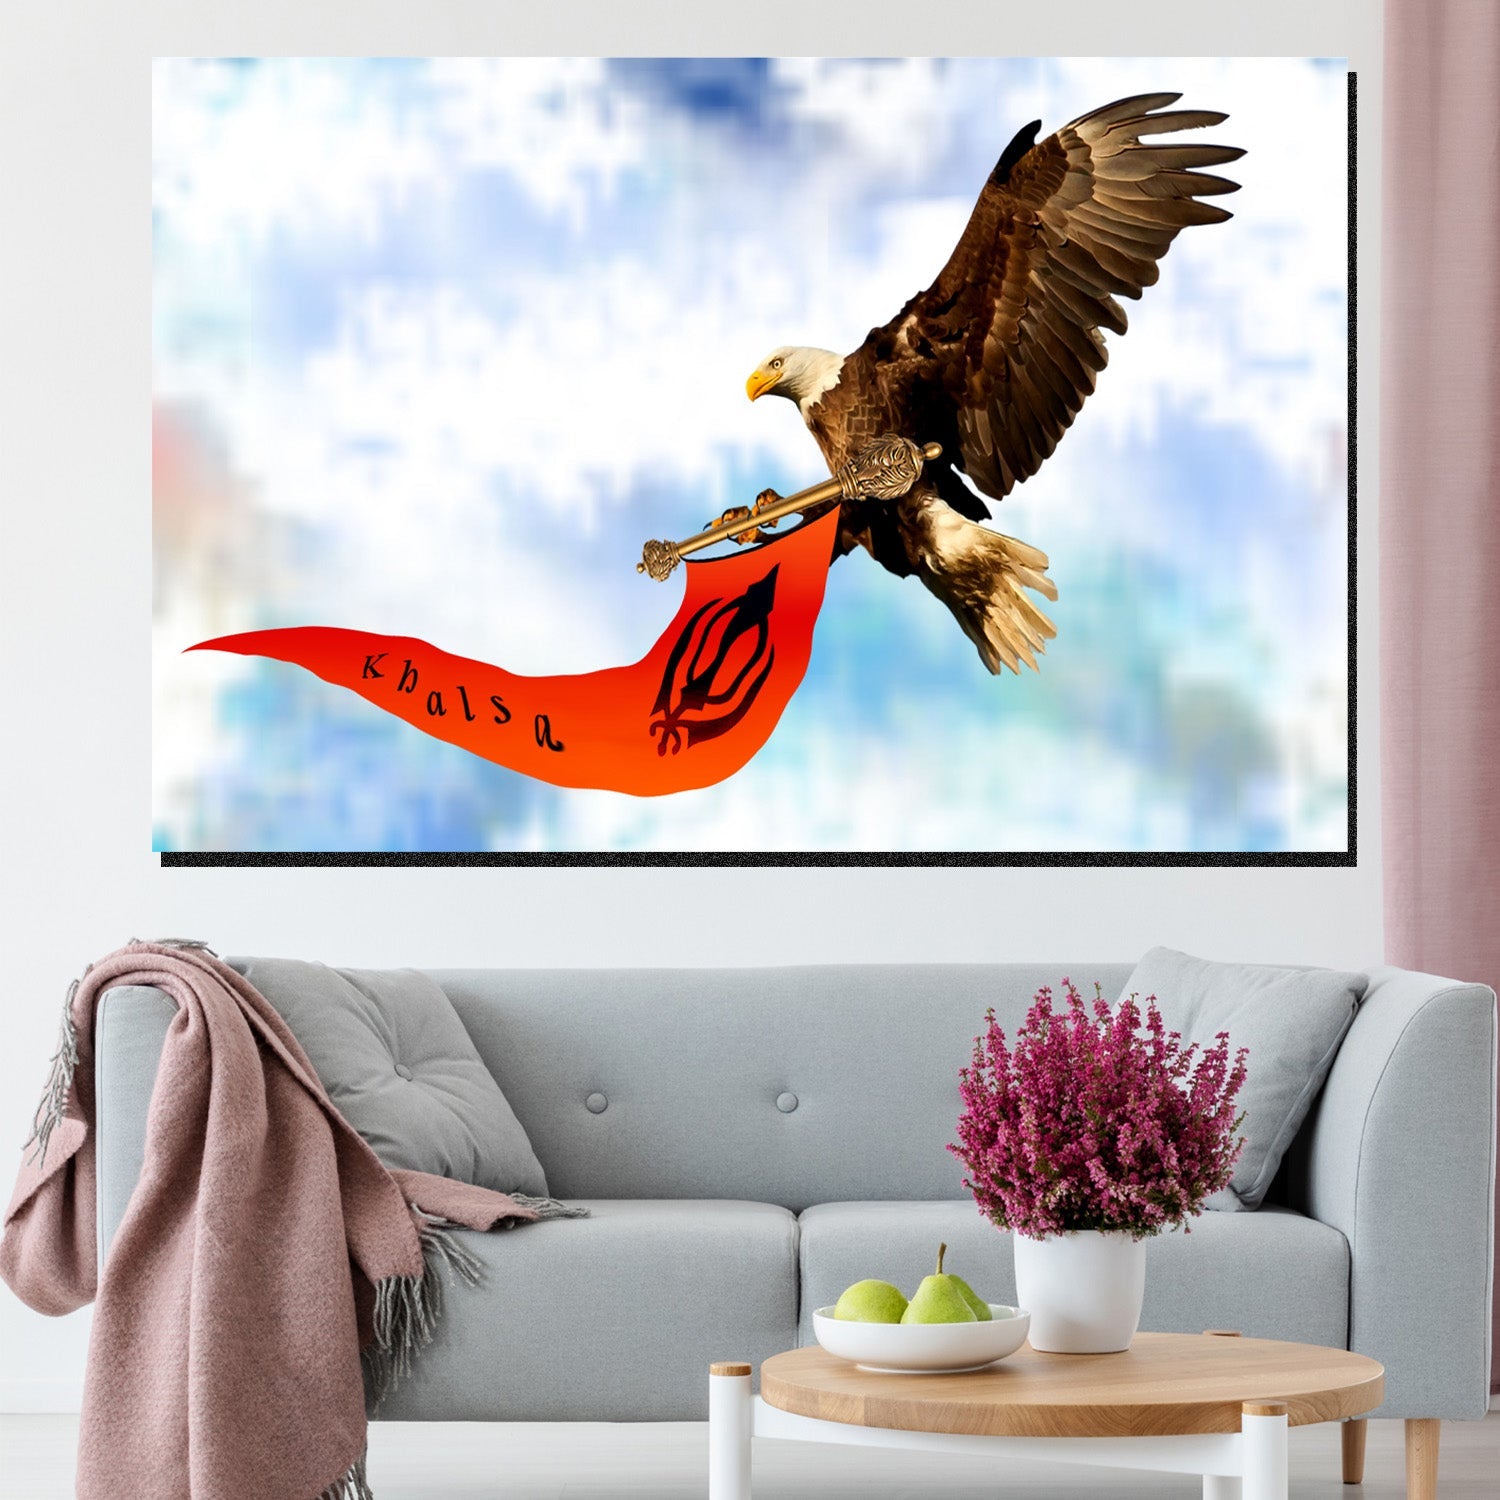 https://cdn.shopify.com/s/files/1/0387/9986/8044/products/EaglewithKhalsaFlagCanvasArtprintStretched-1.jpg